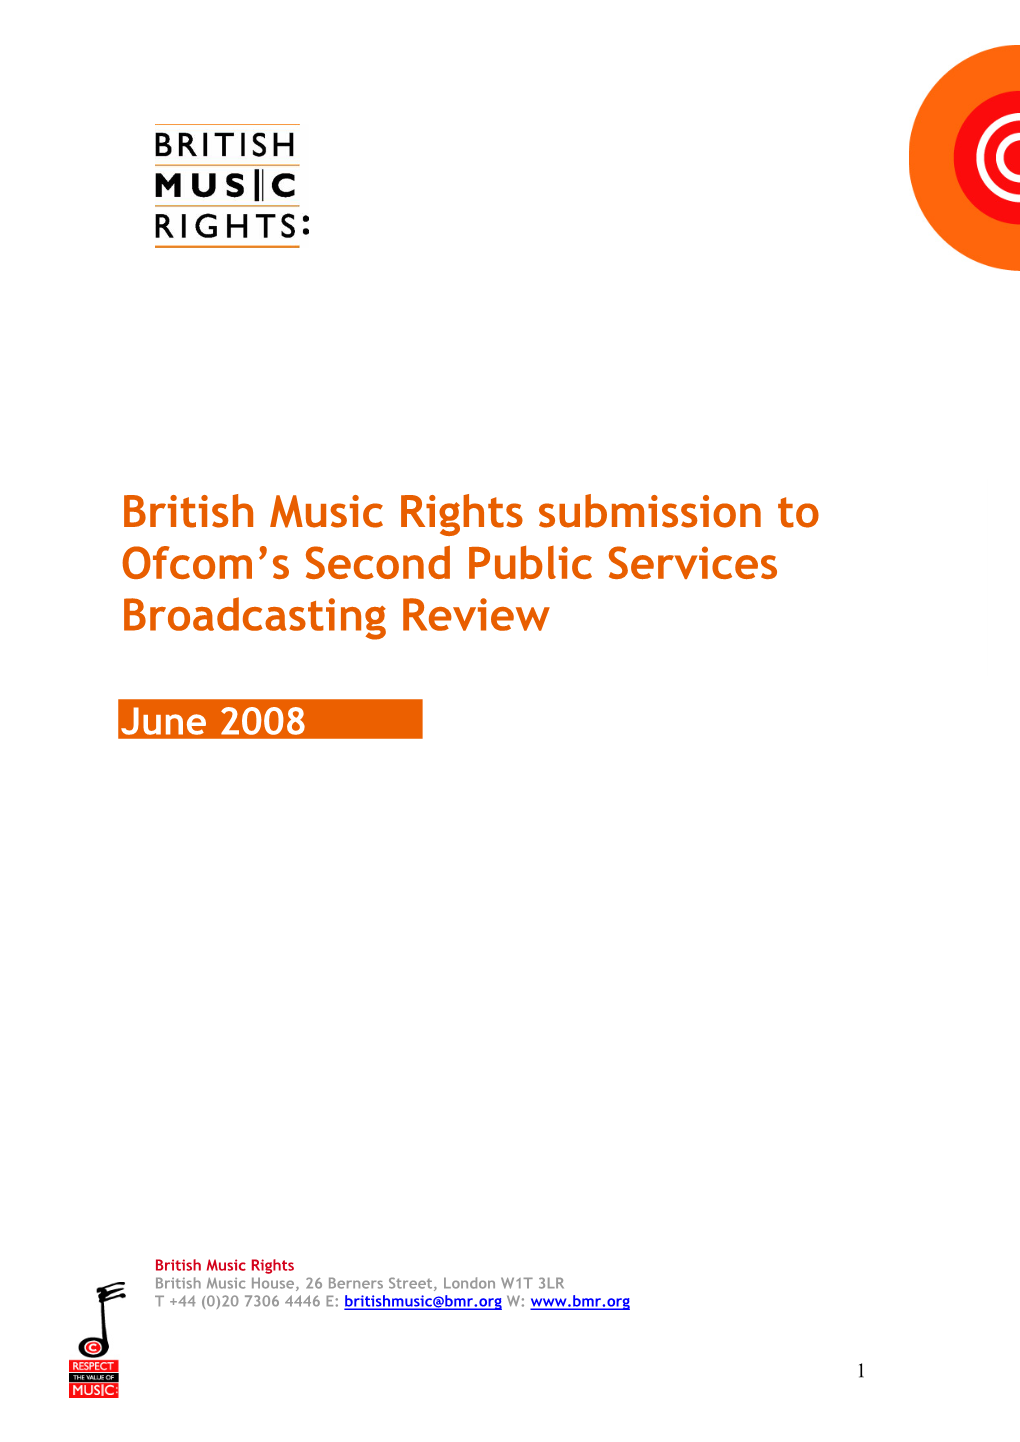 British Music Rights Submission to Ofcom's Second Public Services Broadcasting Review